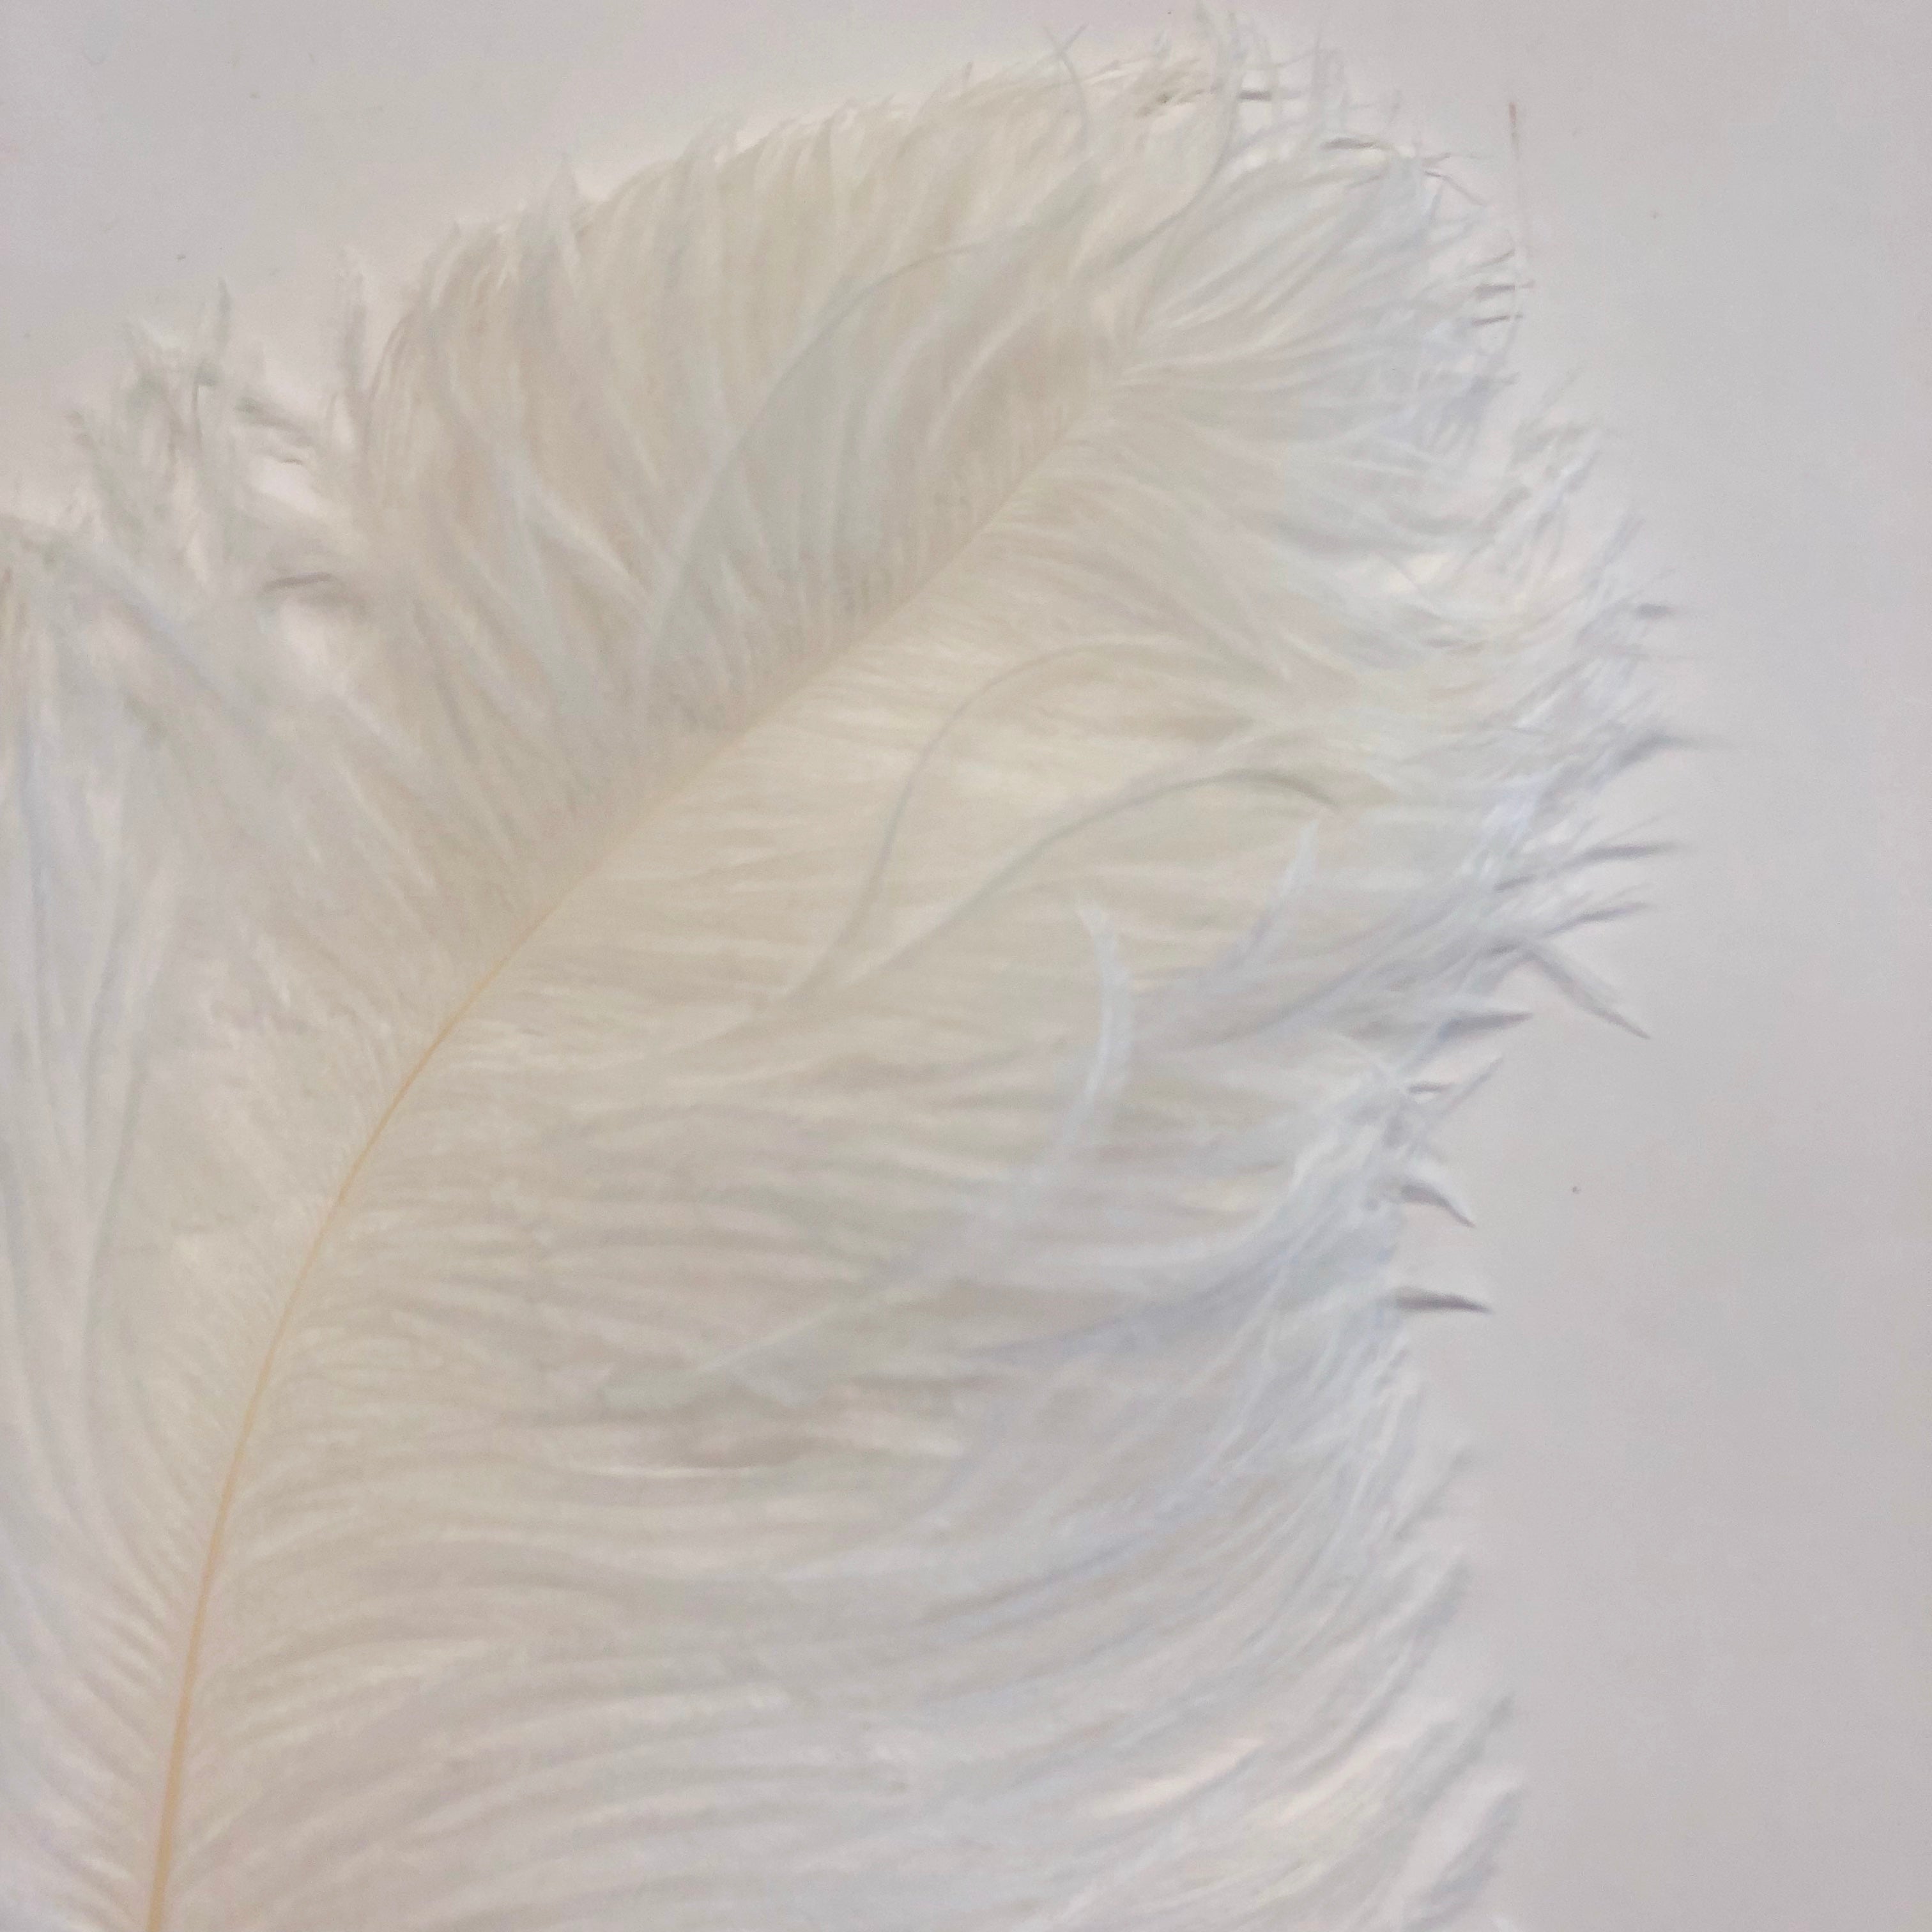 Ostrich Wing Feather Plumes 60-65cm (24-26") - Ivory ((SECONDS))